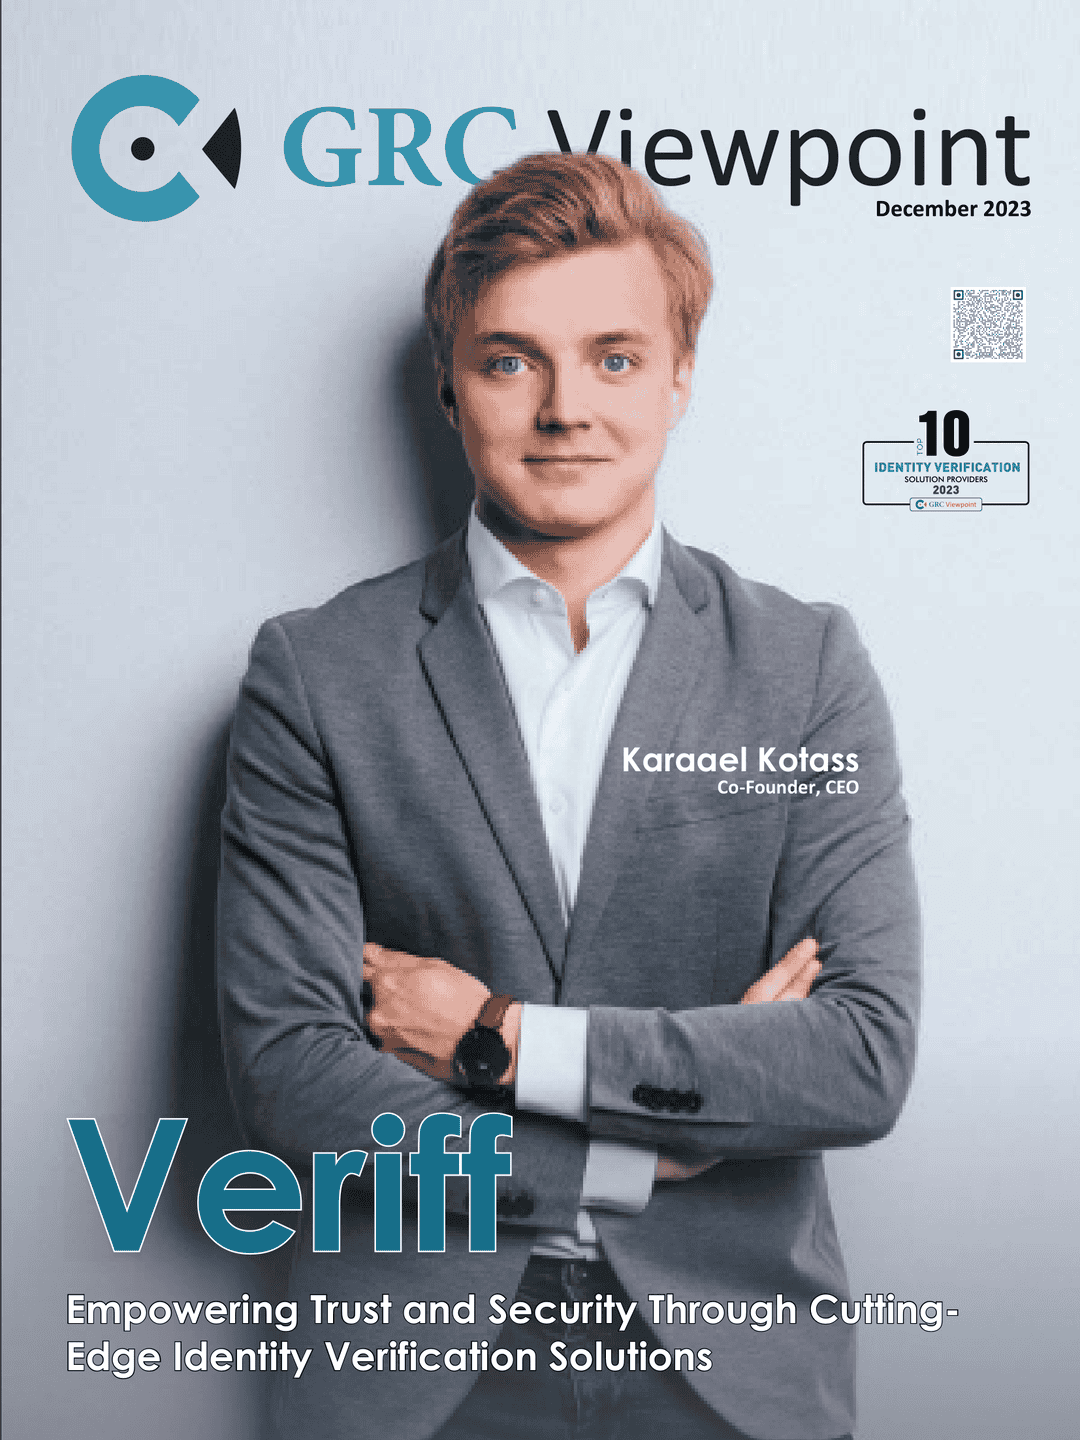 https://www.grcviewpoint.com/magazine/top-10-identity-verification-solution-providers-2023/